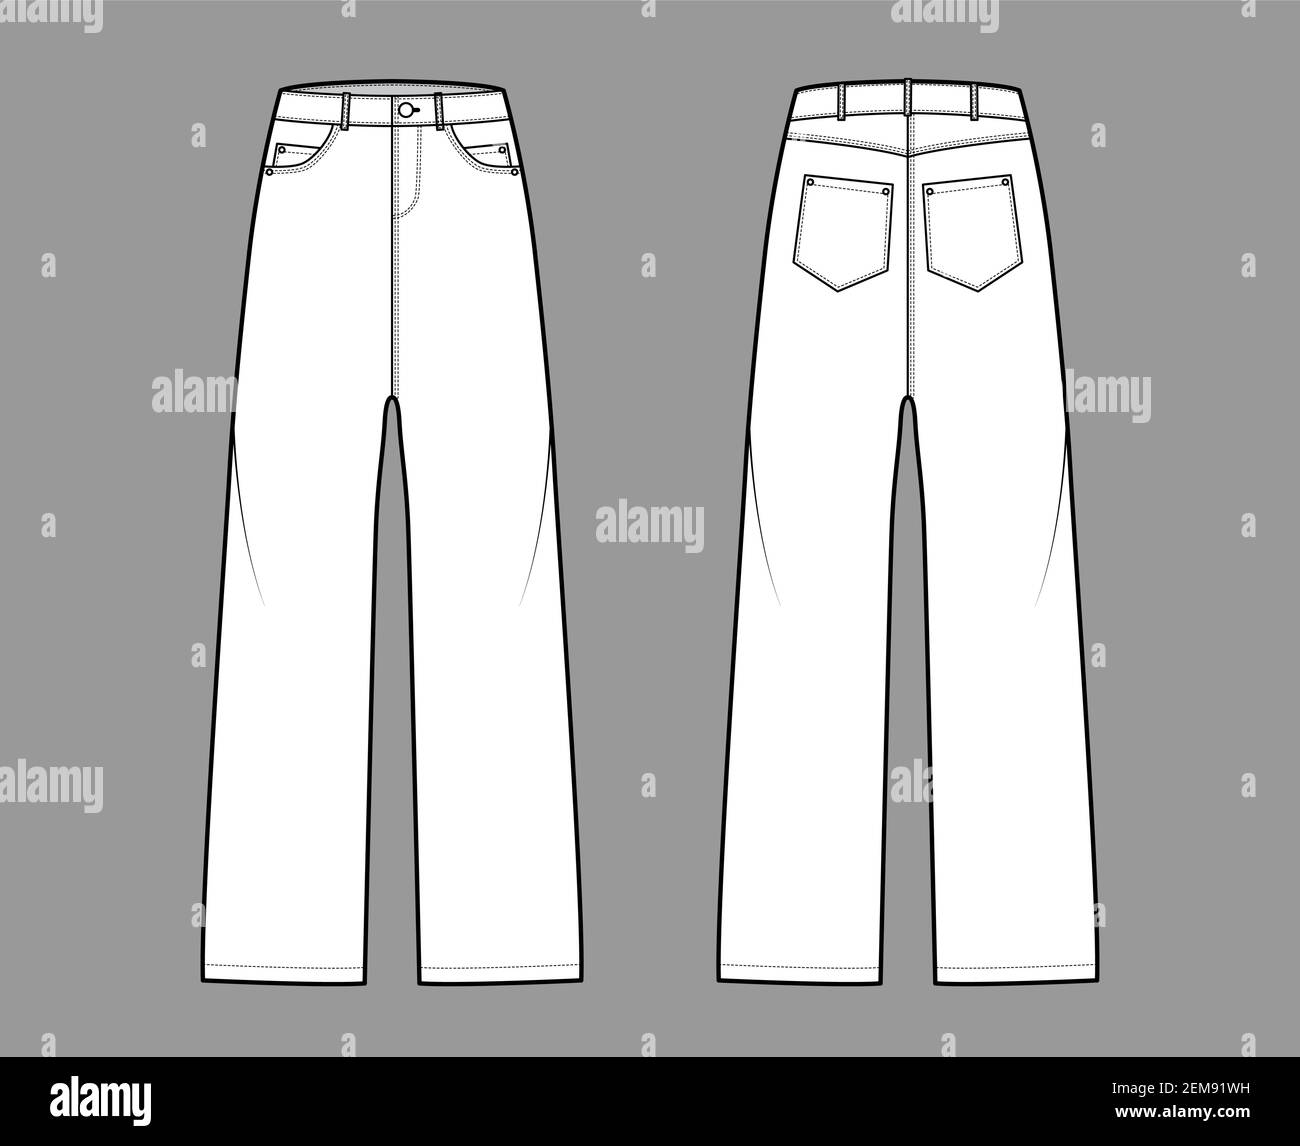 Baggy Jeans Denim pants technical fashion illustration with low rise, 5 pockets, Rivets, belt loops.